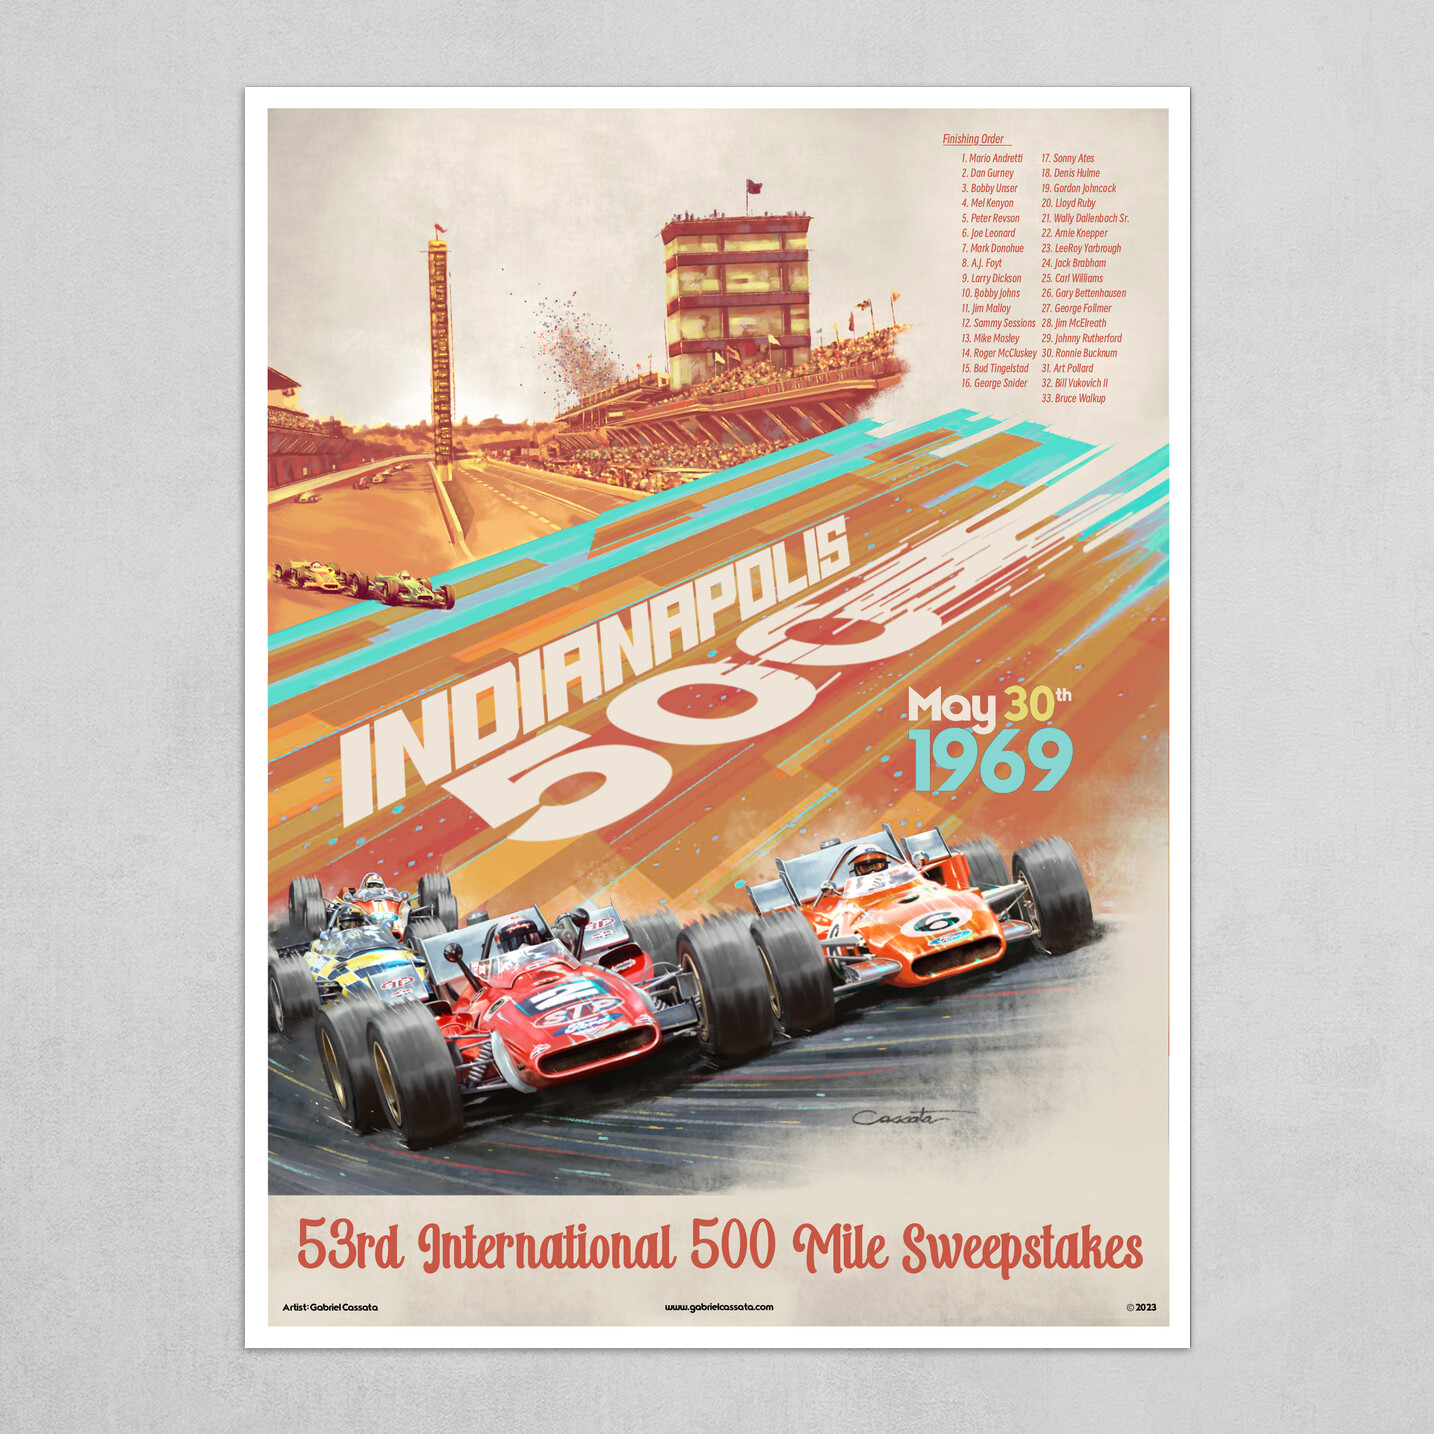 1969 Indianapolis 500 poster